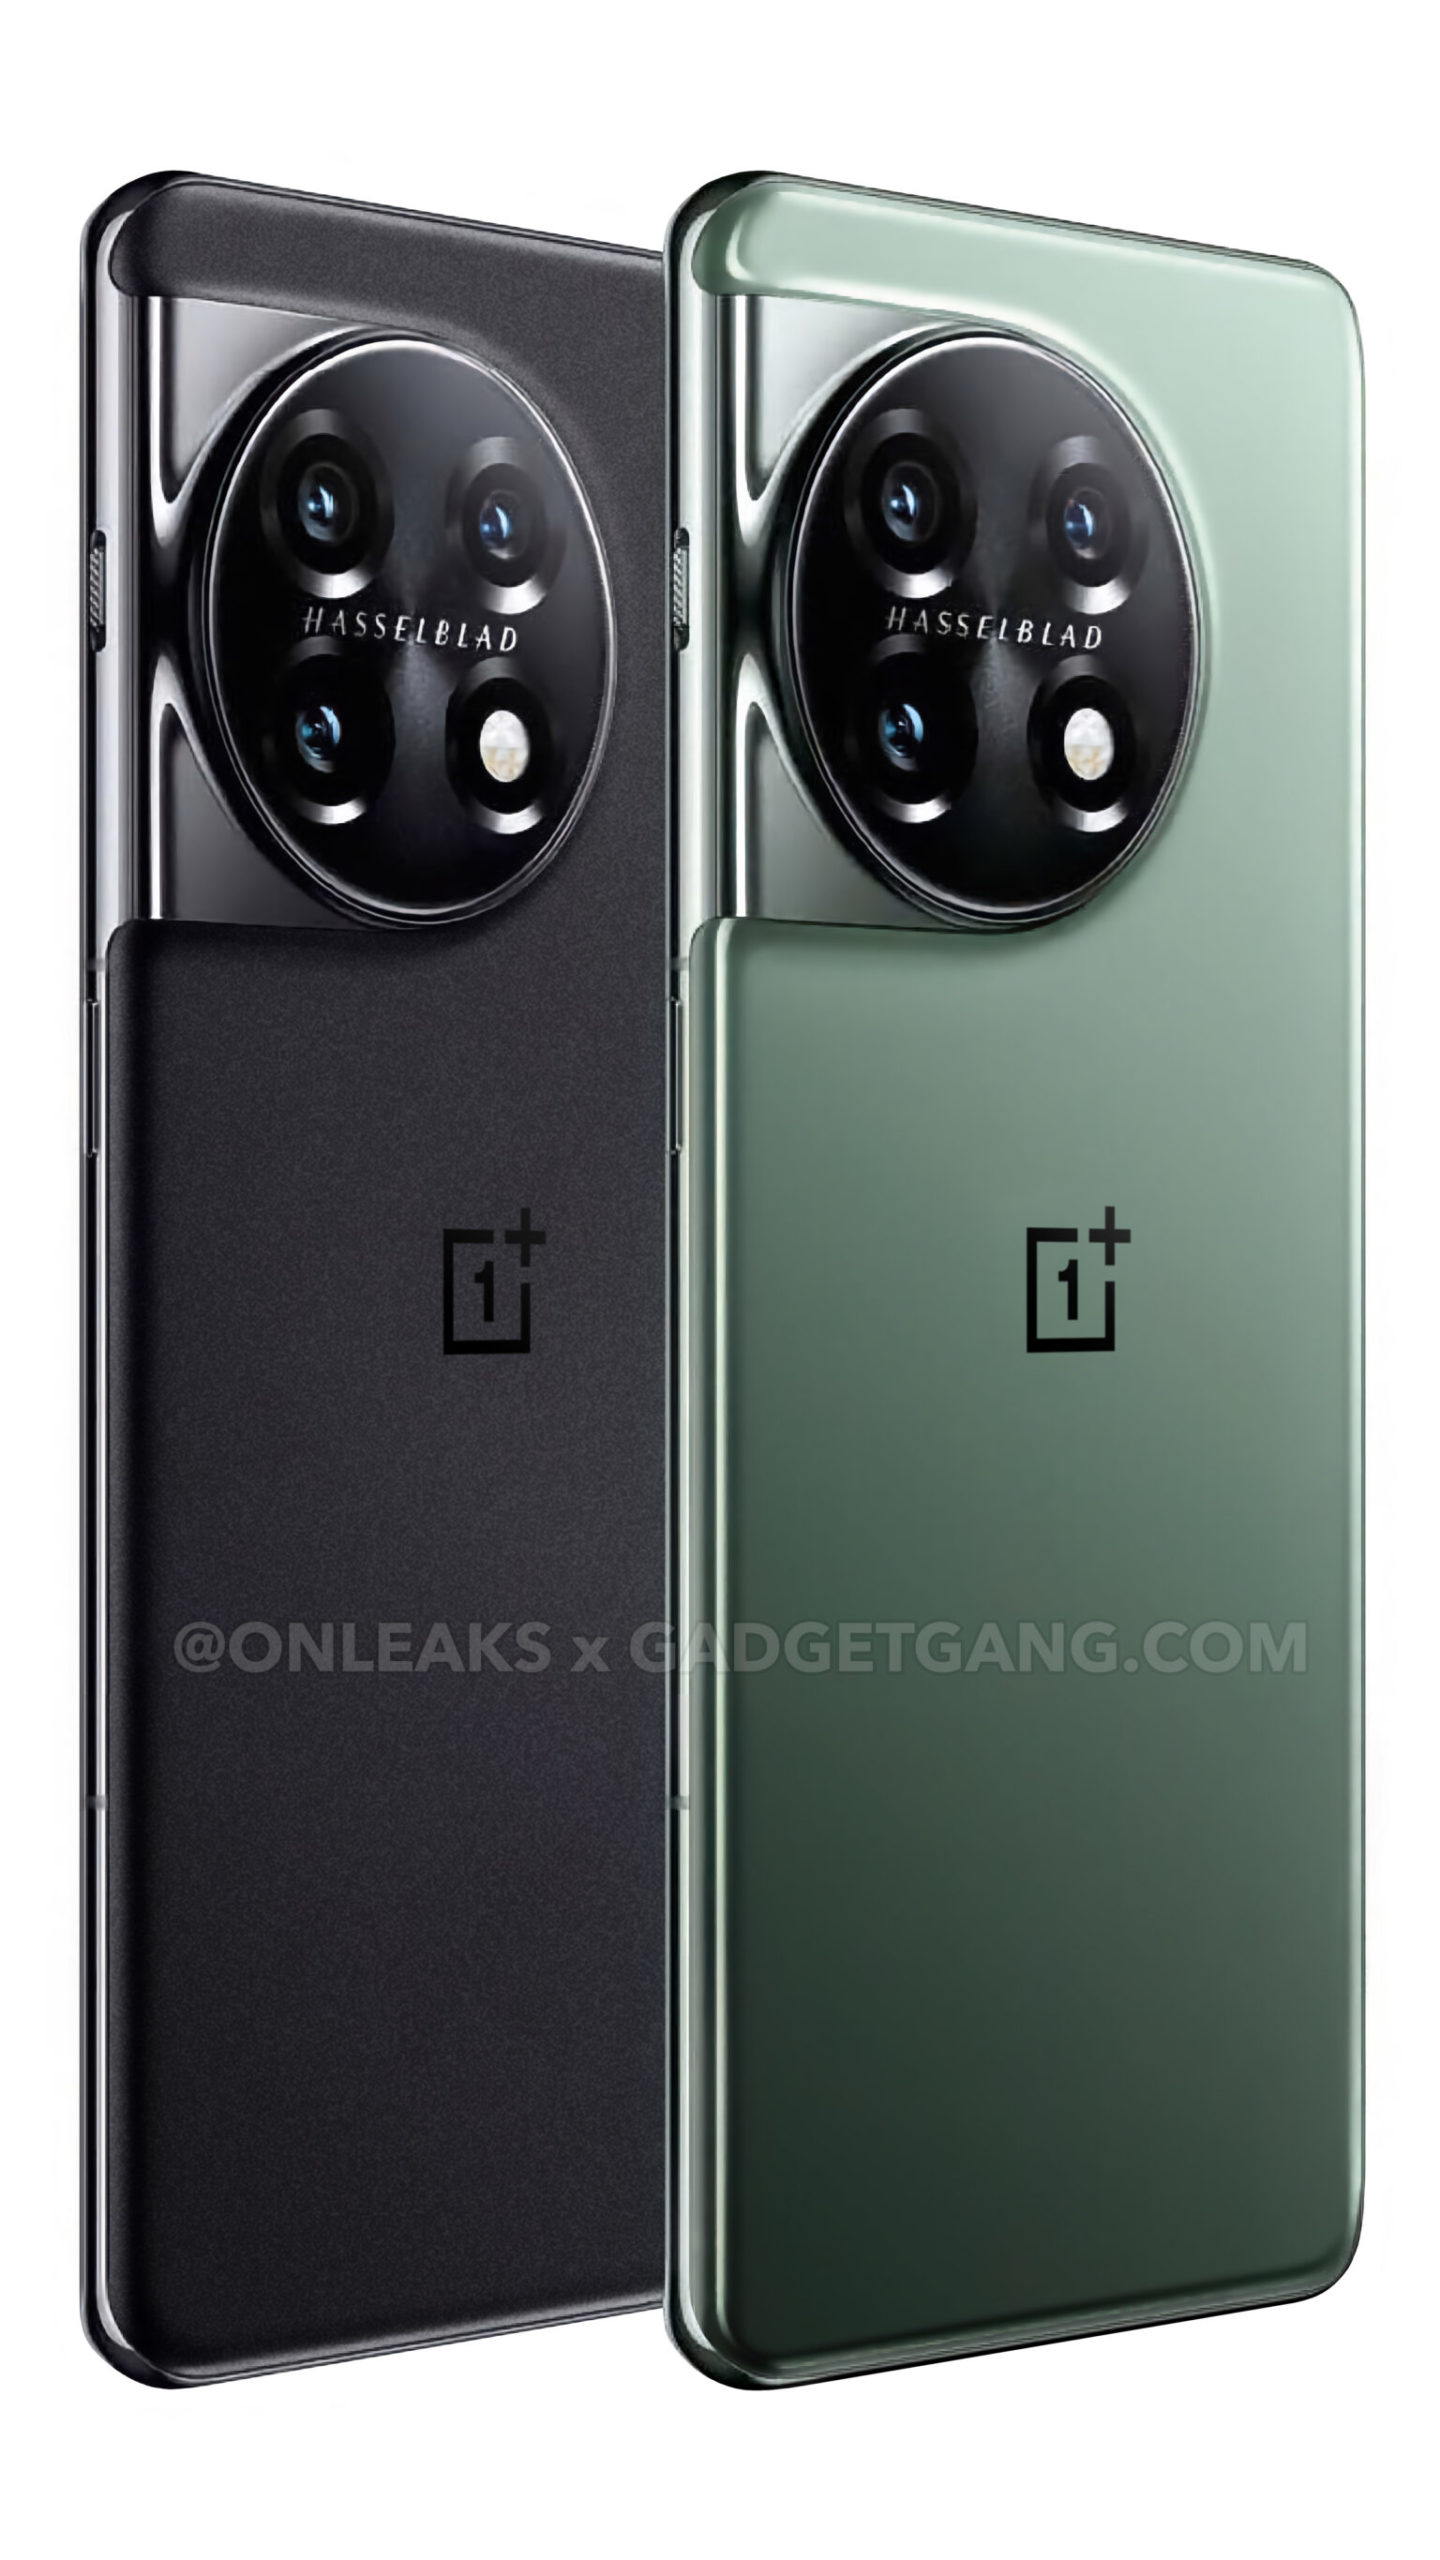 OnePlus-11-Official-Render-1536x2731-1-scaled.jpg?ezimgfmt=rs%3Adevice%2Frscb5-1